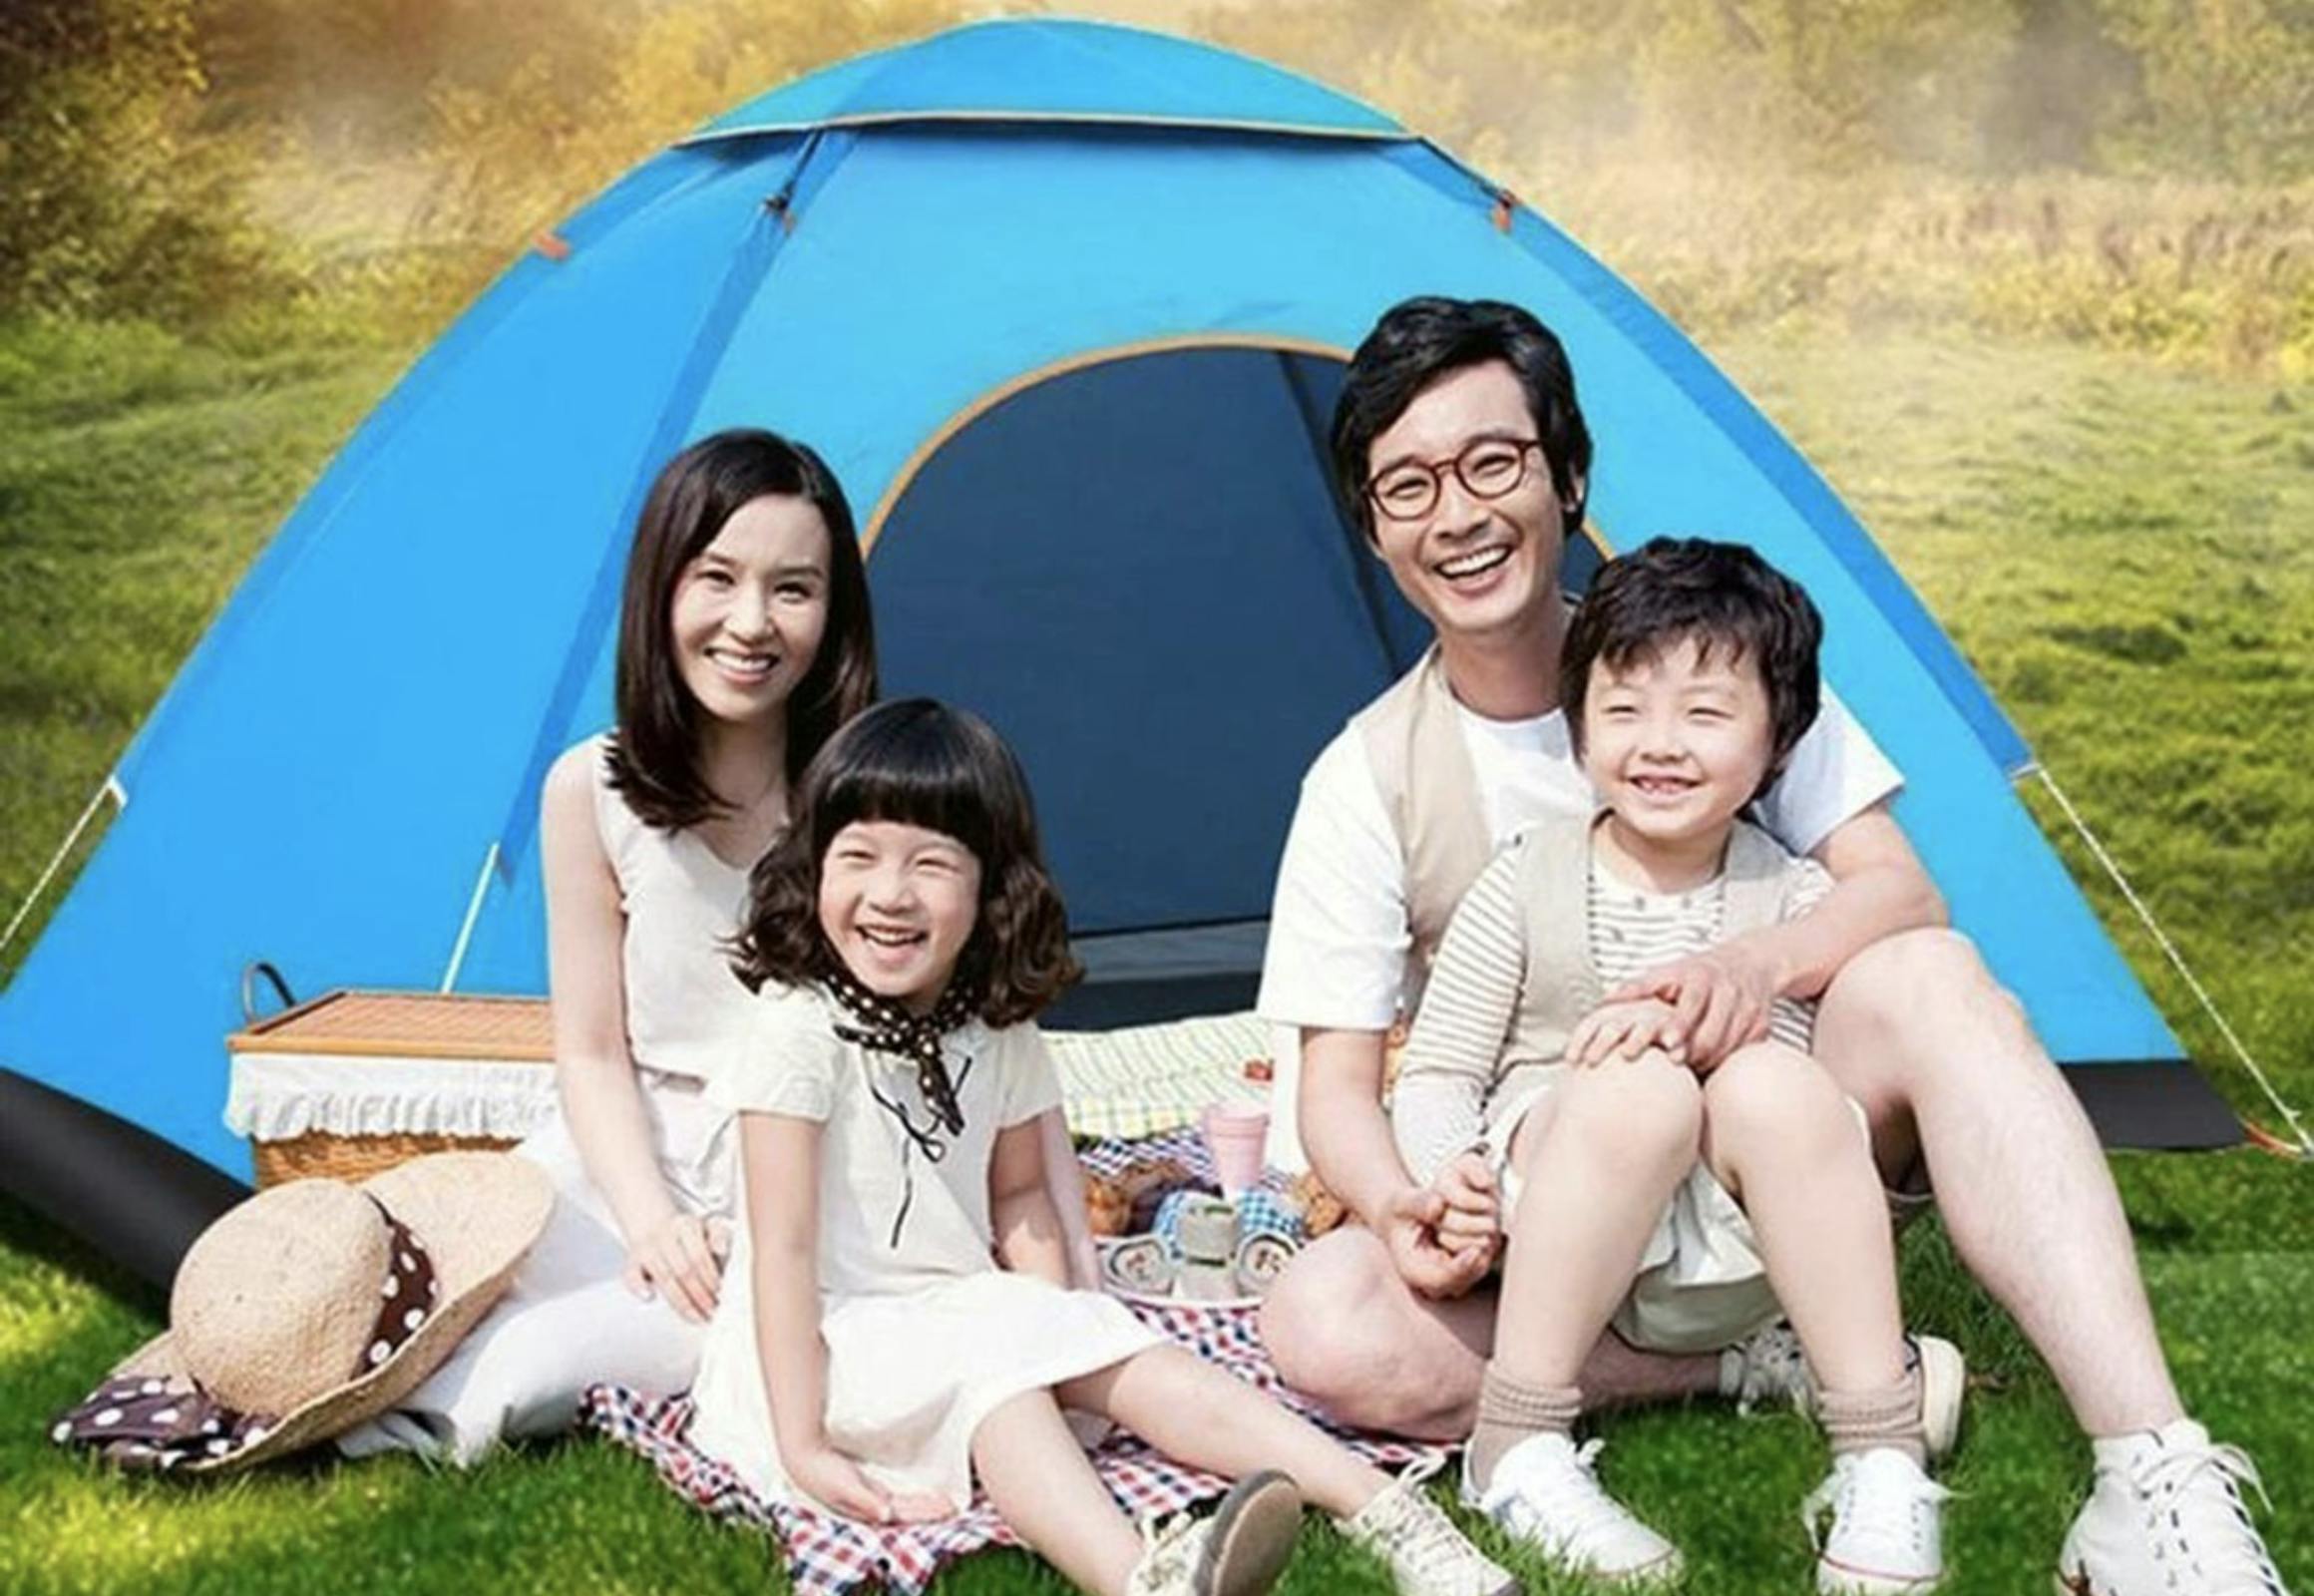 until gone Personal Travel 3-Person Pop-up Tent stock image 2023